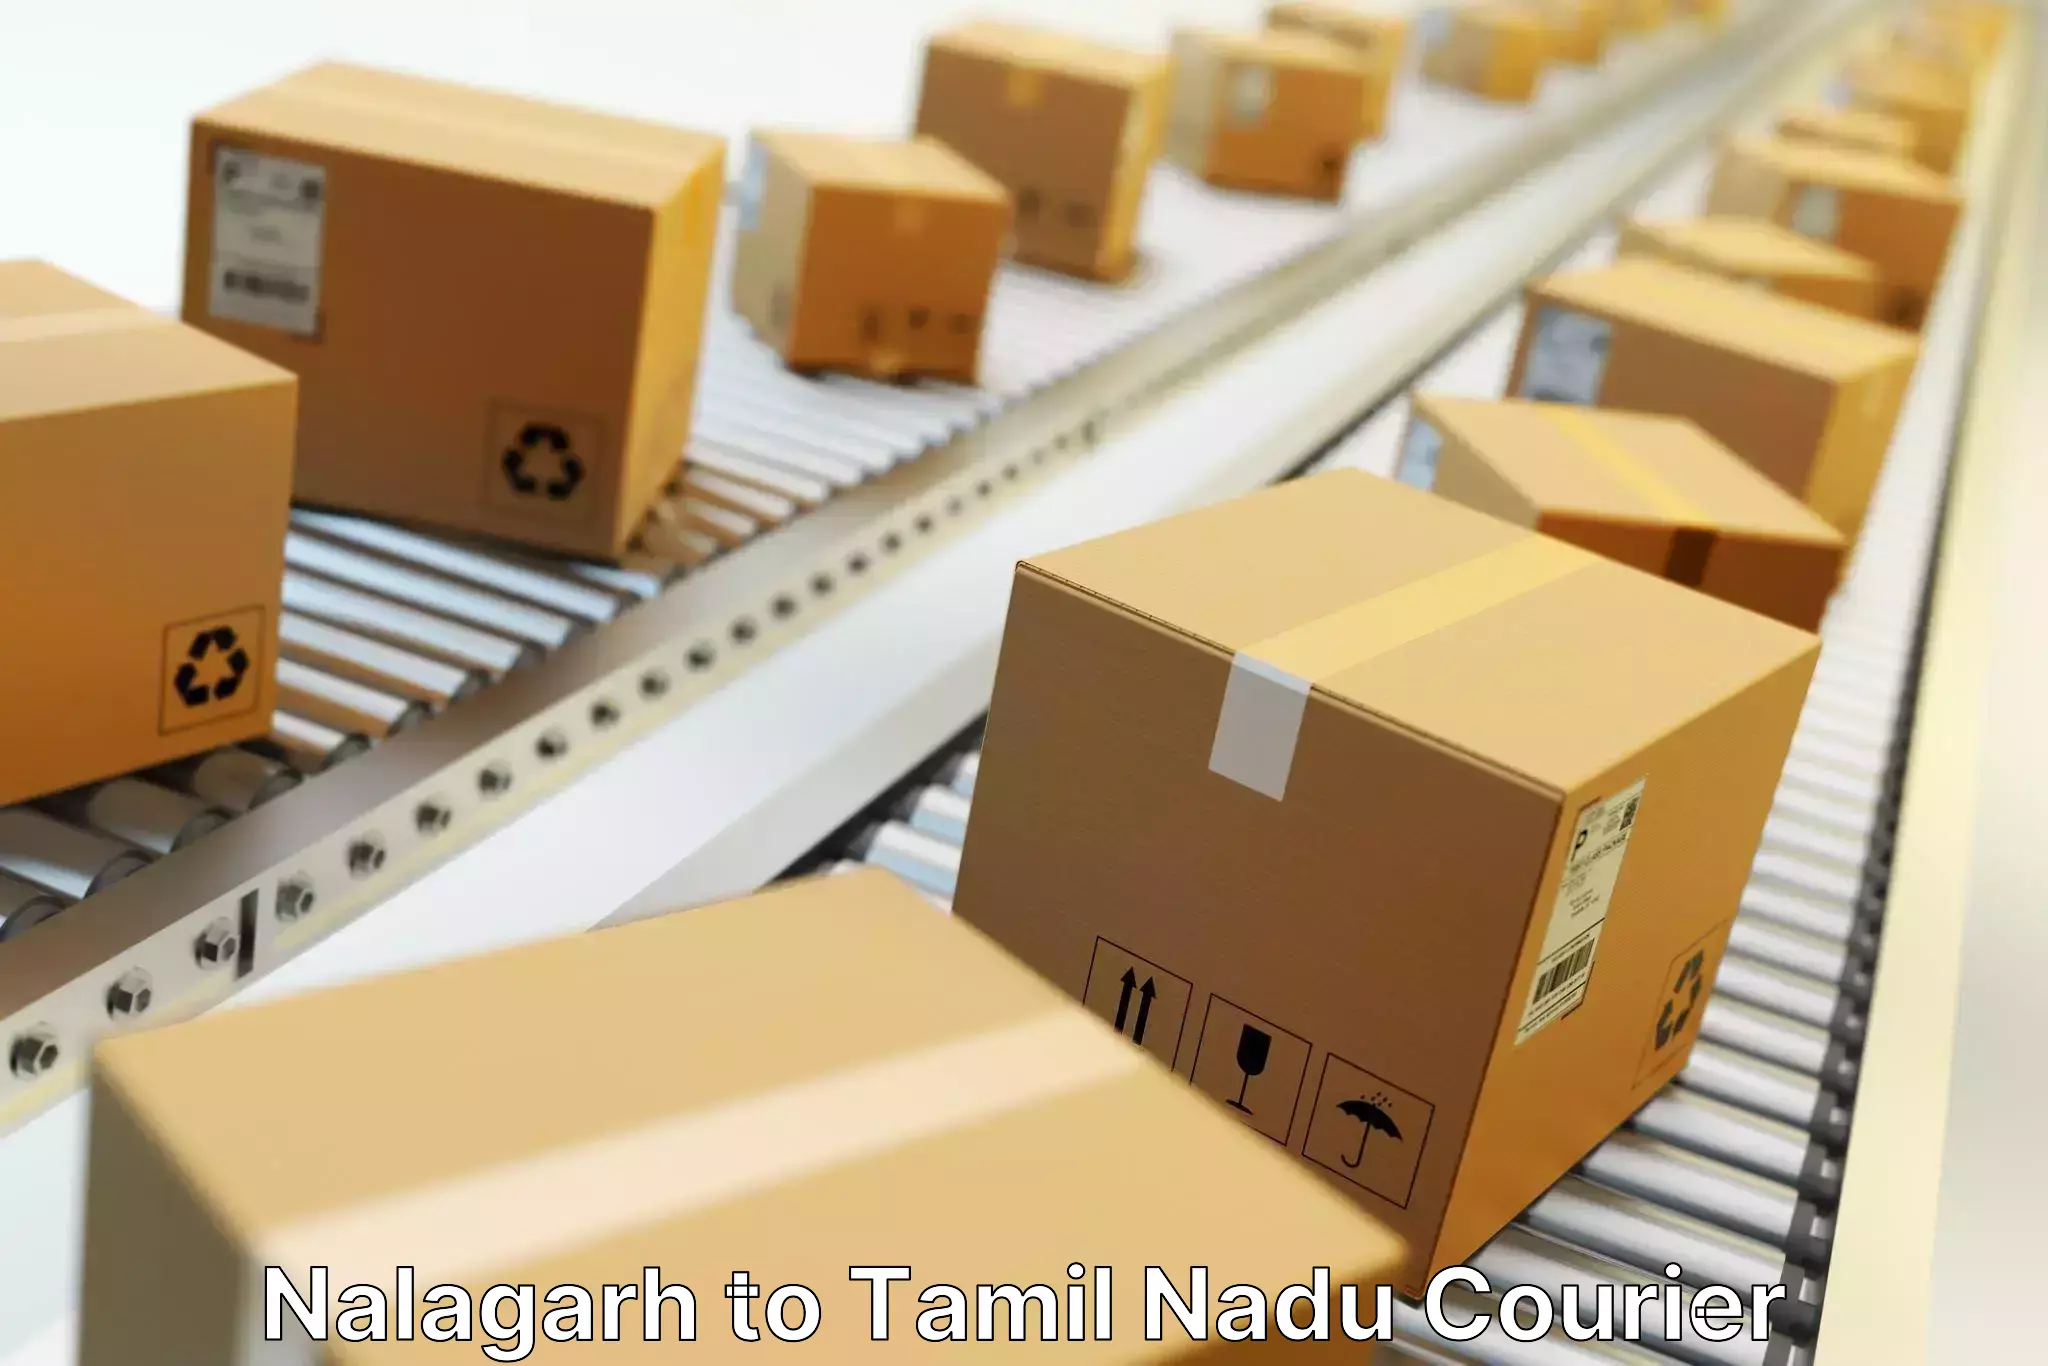 Quality courier services Nalagarh to Chennai Port